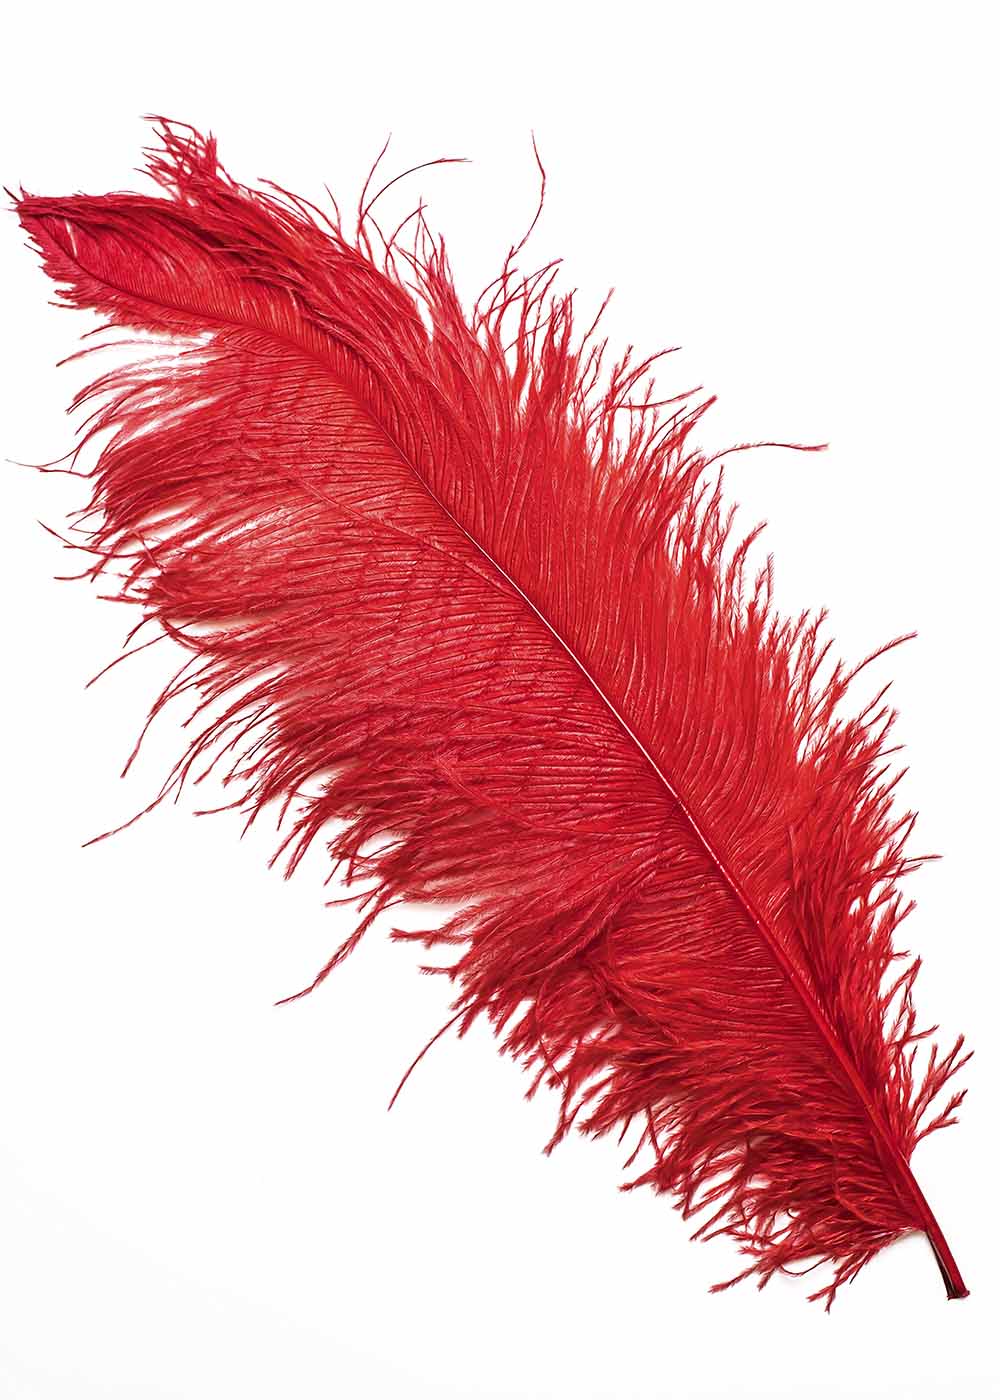 Ostrich feather to buy at the Grand Prix store